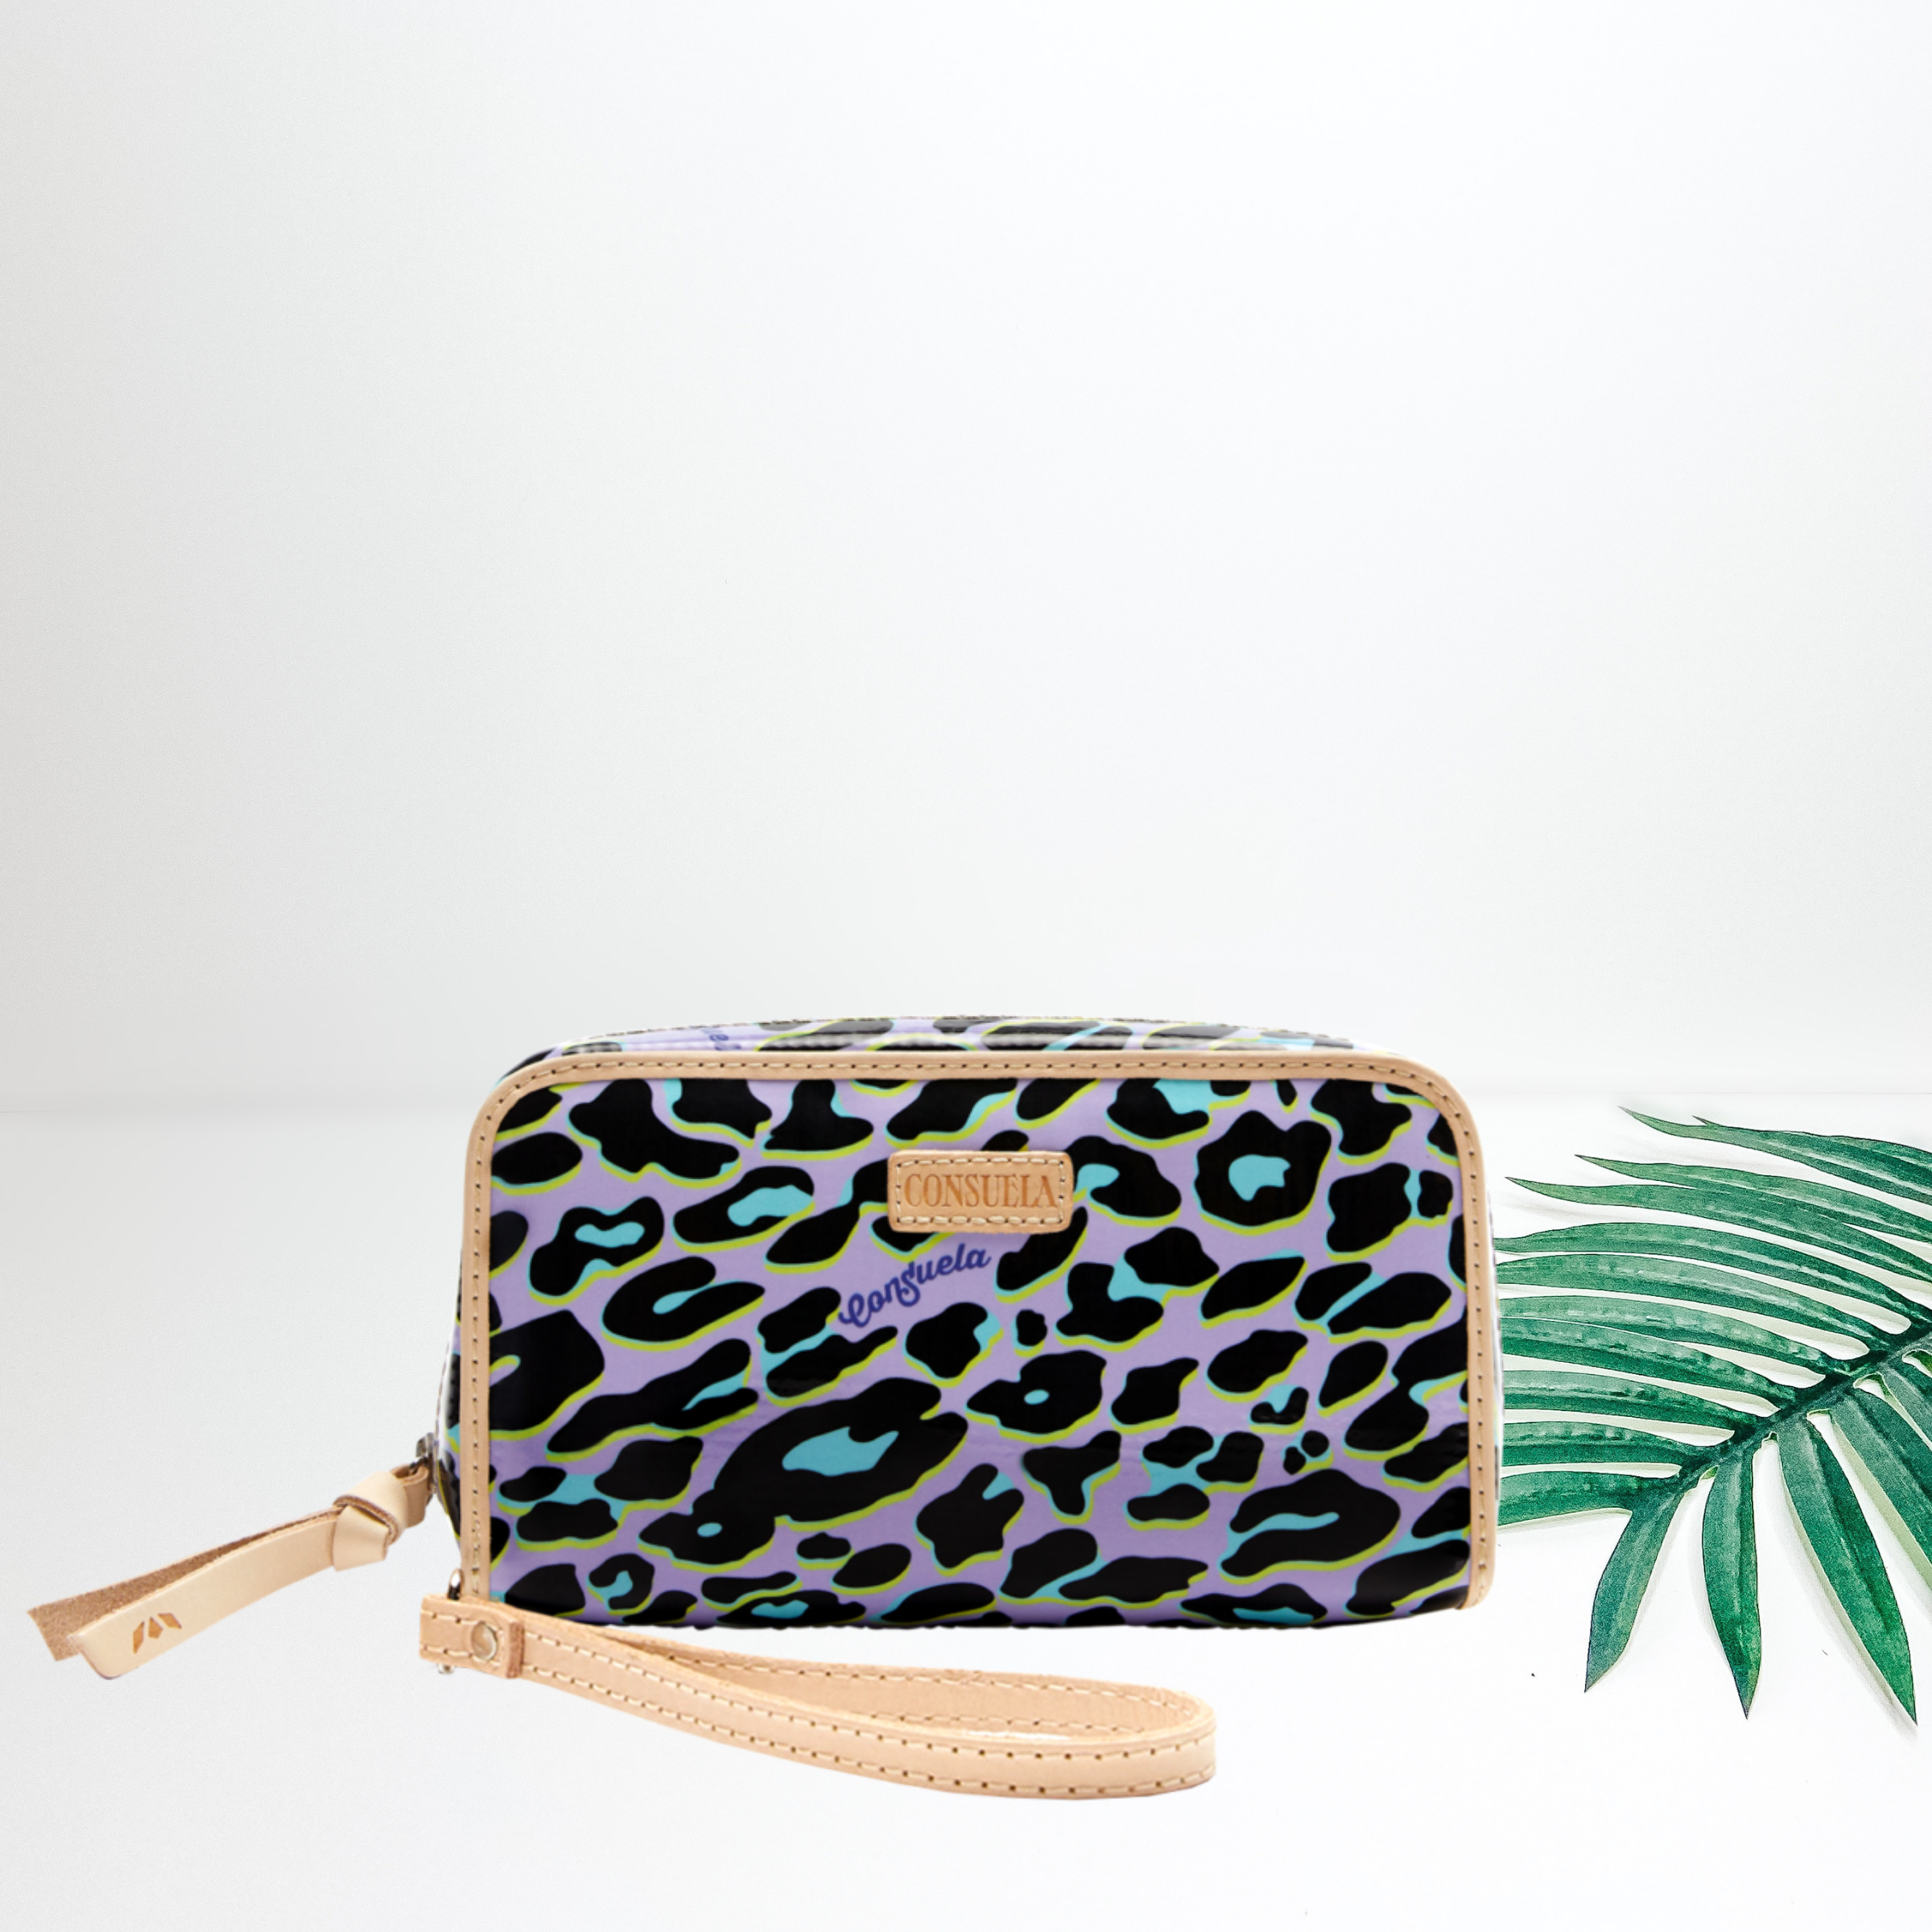 A purple and green leopard print wallet pictured on white background with a palm leaf.